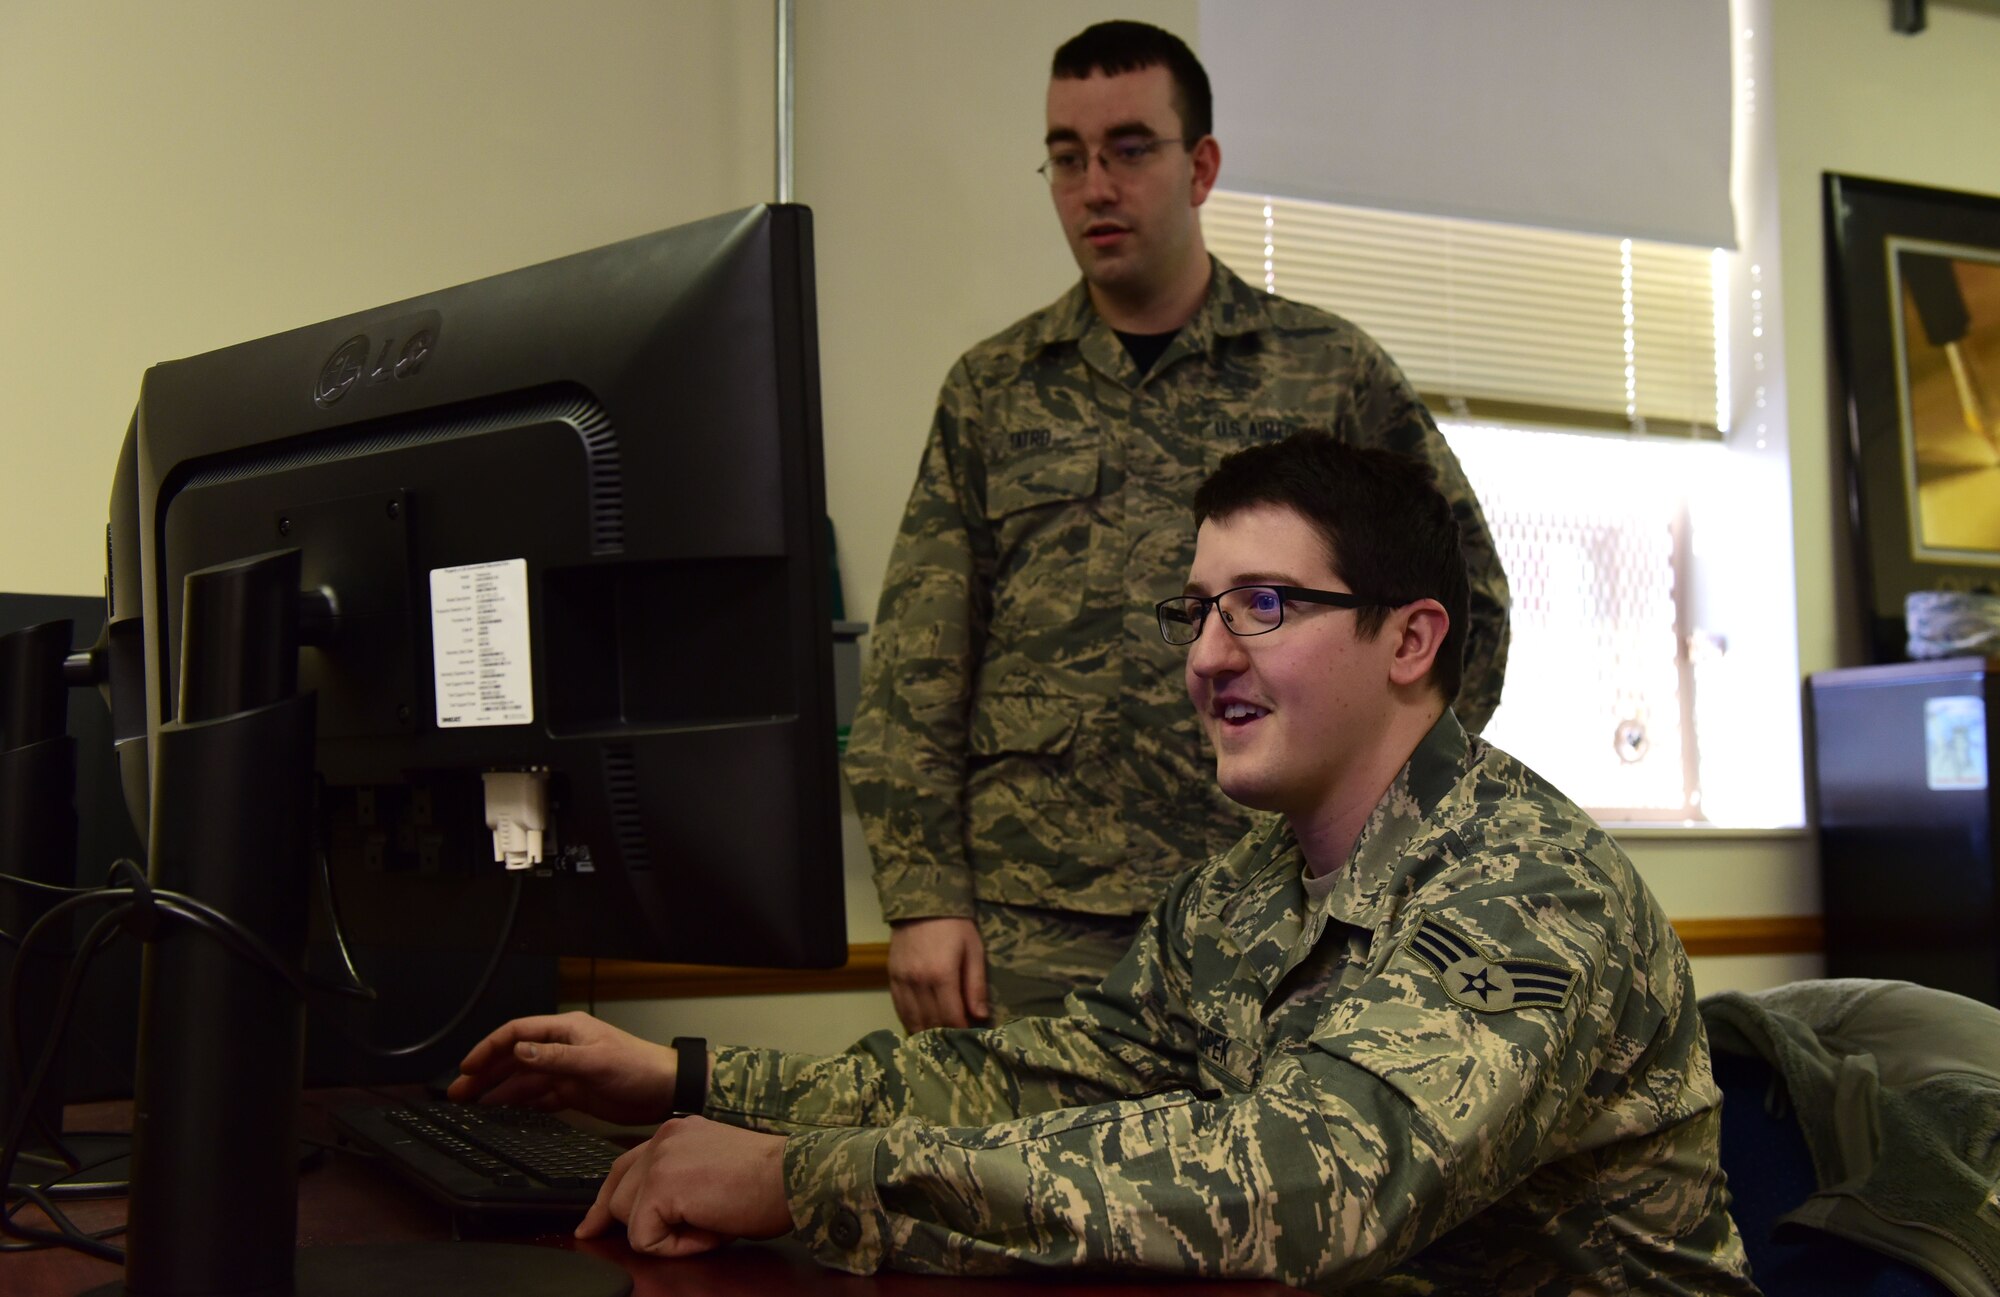 Senior Airman Erik Tatro, left, a programmer with the 595th Strategic Communications Squadron (SCS), and Senior Airman Gregory Salopek, also a programmer with the 595th SCS, sit at a computer in the 595th SCS offices at Offutt Air Force Base, Nebraska, January 12, 2018. Both Airmen participated in a DOD-Silicon Valley partnership in San Francisco in 2017, helping to create a program that would increase the efficiency of the aerial refueling scheduling process.